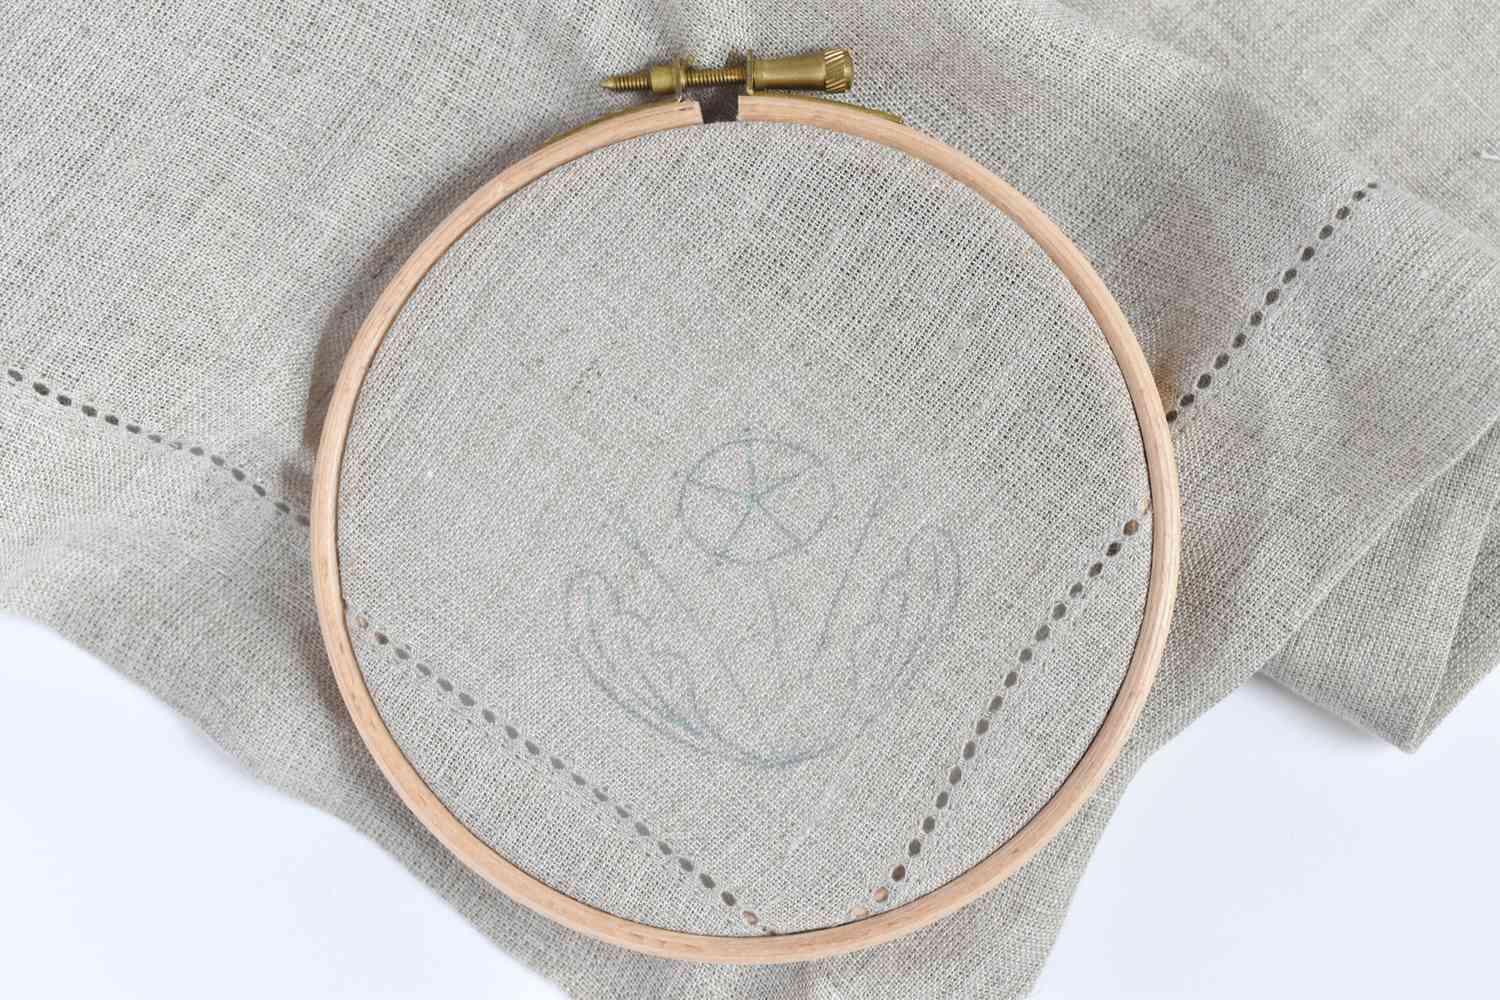 Embroidery pattern transferred on a linen napkin